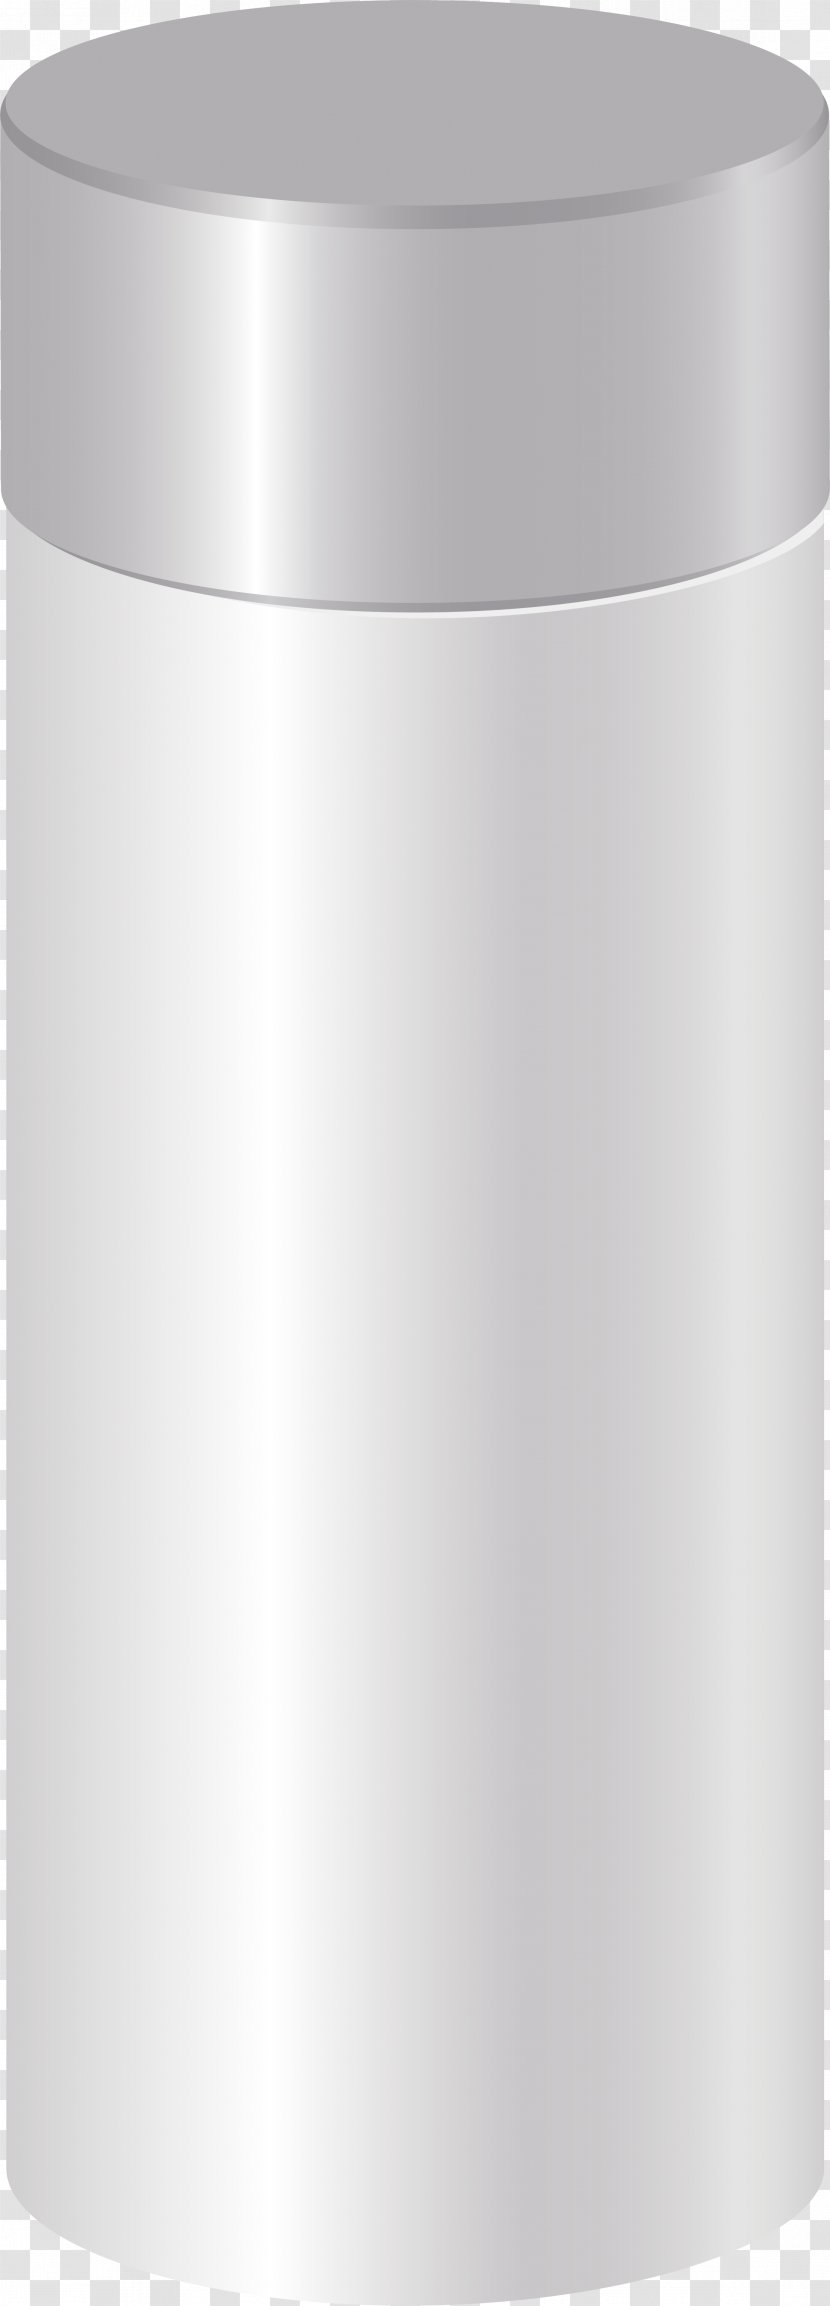 Cylinder Angle - Glass Cup Transparent PNG